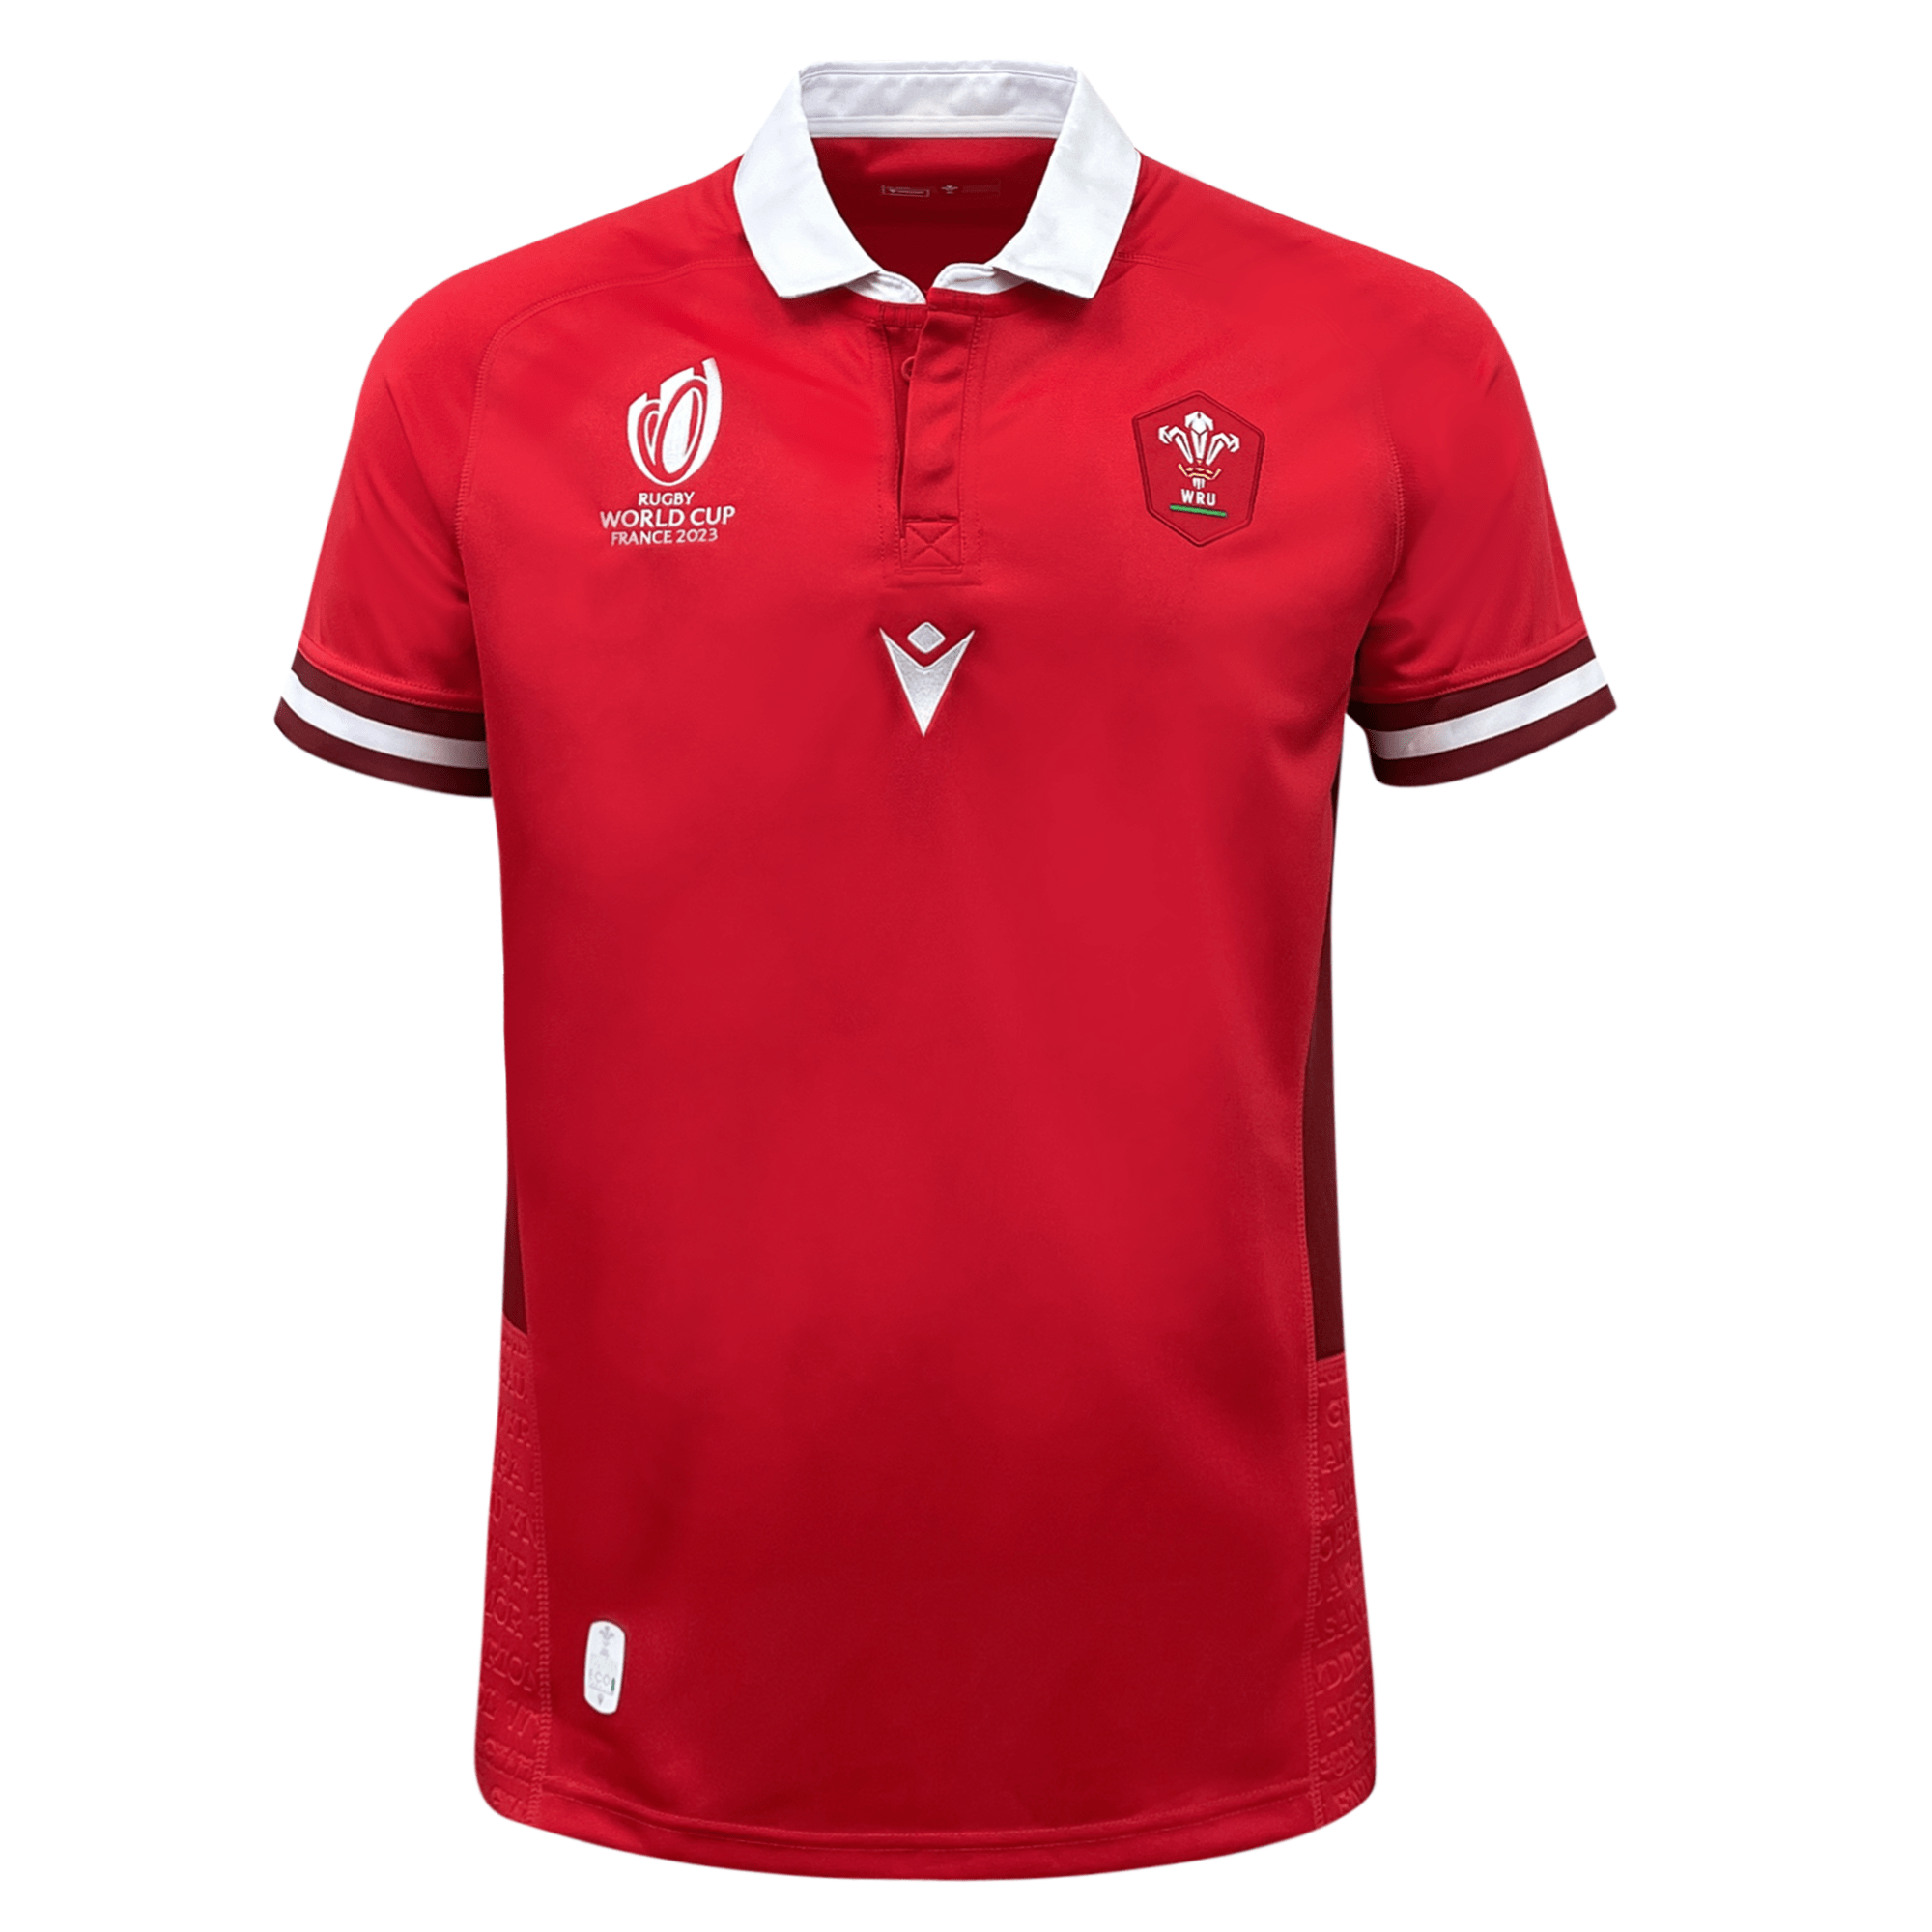 Wales Rugby World Cup 23 Home Jersey by Macron World Rugby Shop